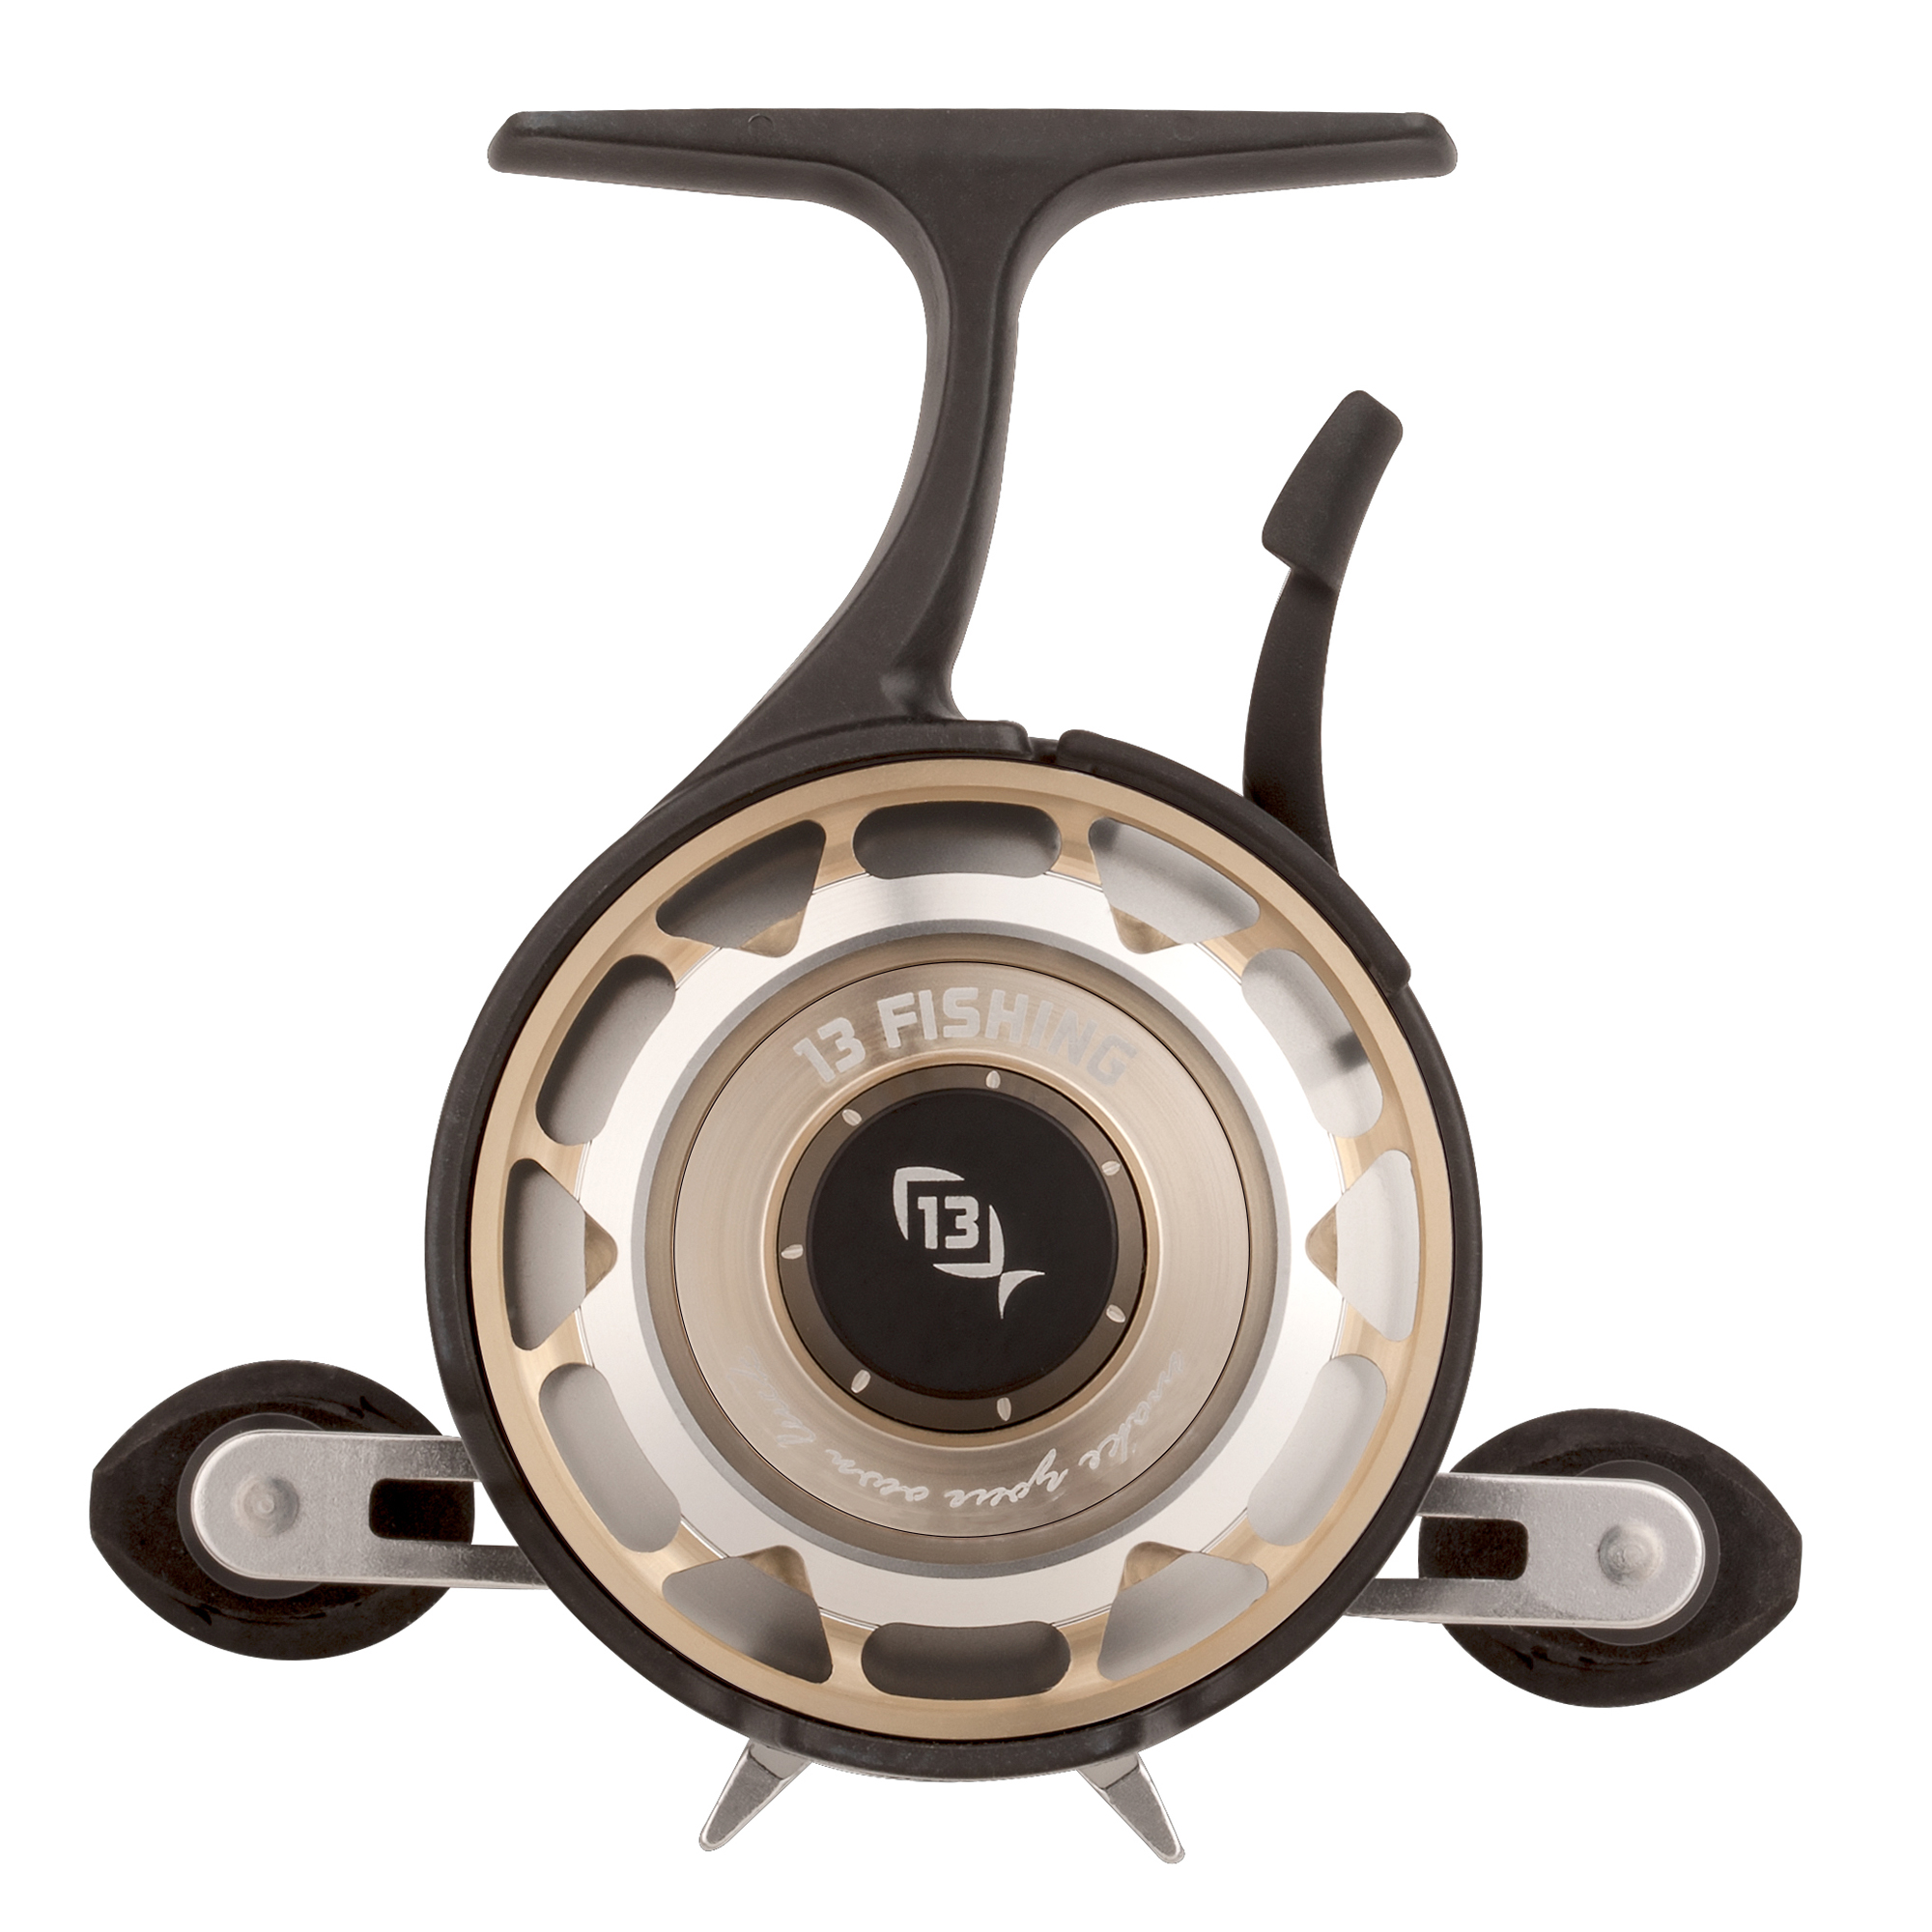 https://store.themeateater.com/on/demandware.static/-/Sites-meateater-master/default/dwbed1e8e8/13-fishing-freefall-carbon-inline-ice-fishing-reel/13-fishing-freefall-carbon-inline-ice-fishing-reel_global_primary.jpg